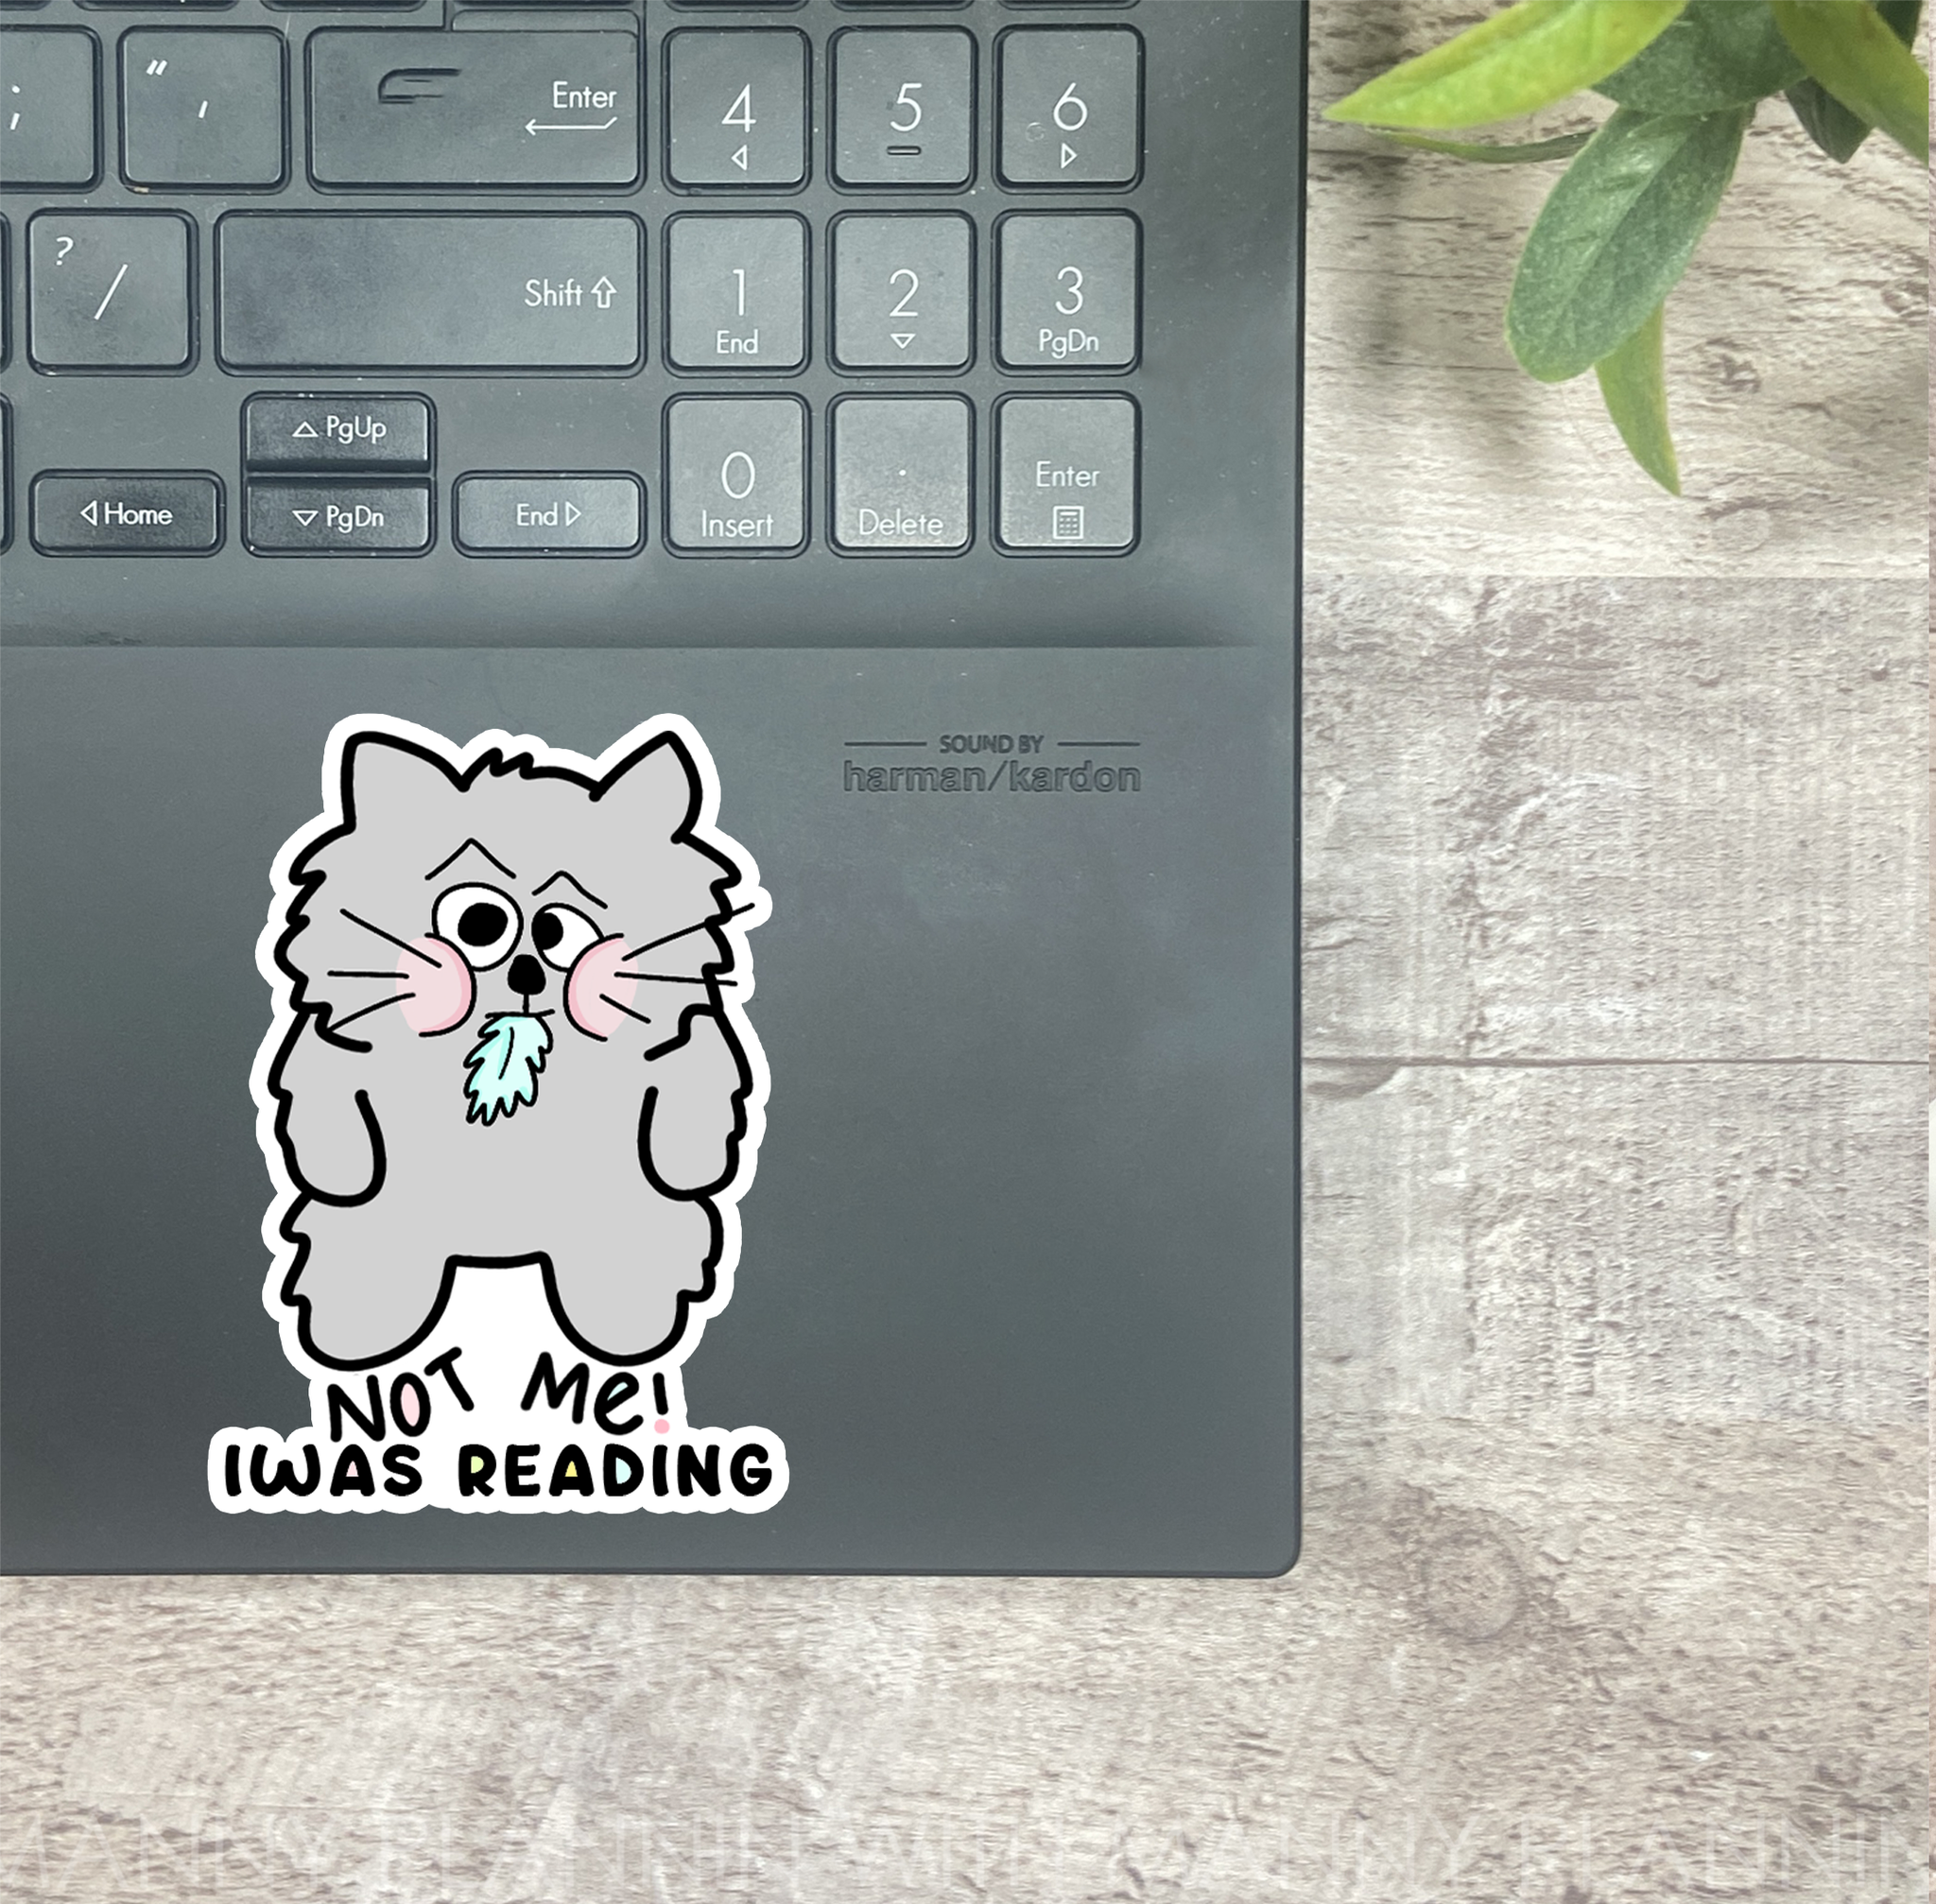 Not Me, I was Reading... Vinyl Sticker, Magnetic Bookmark, & Notecard MB42